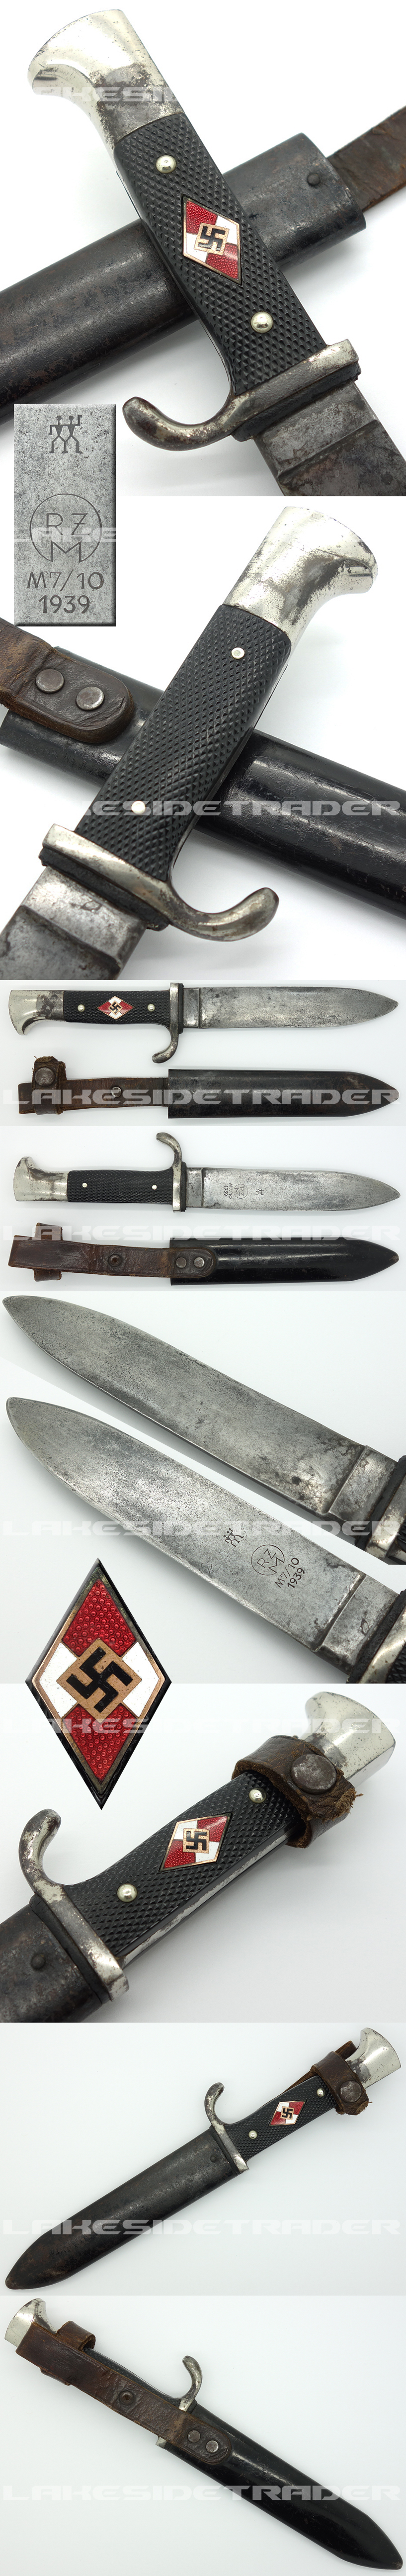 Transitional Hitler Youth Knife by J.A. Henckels 1939